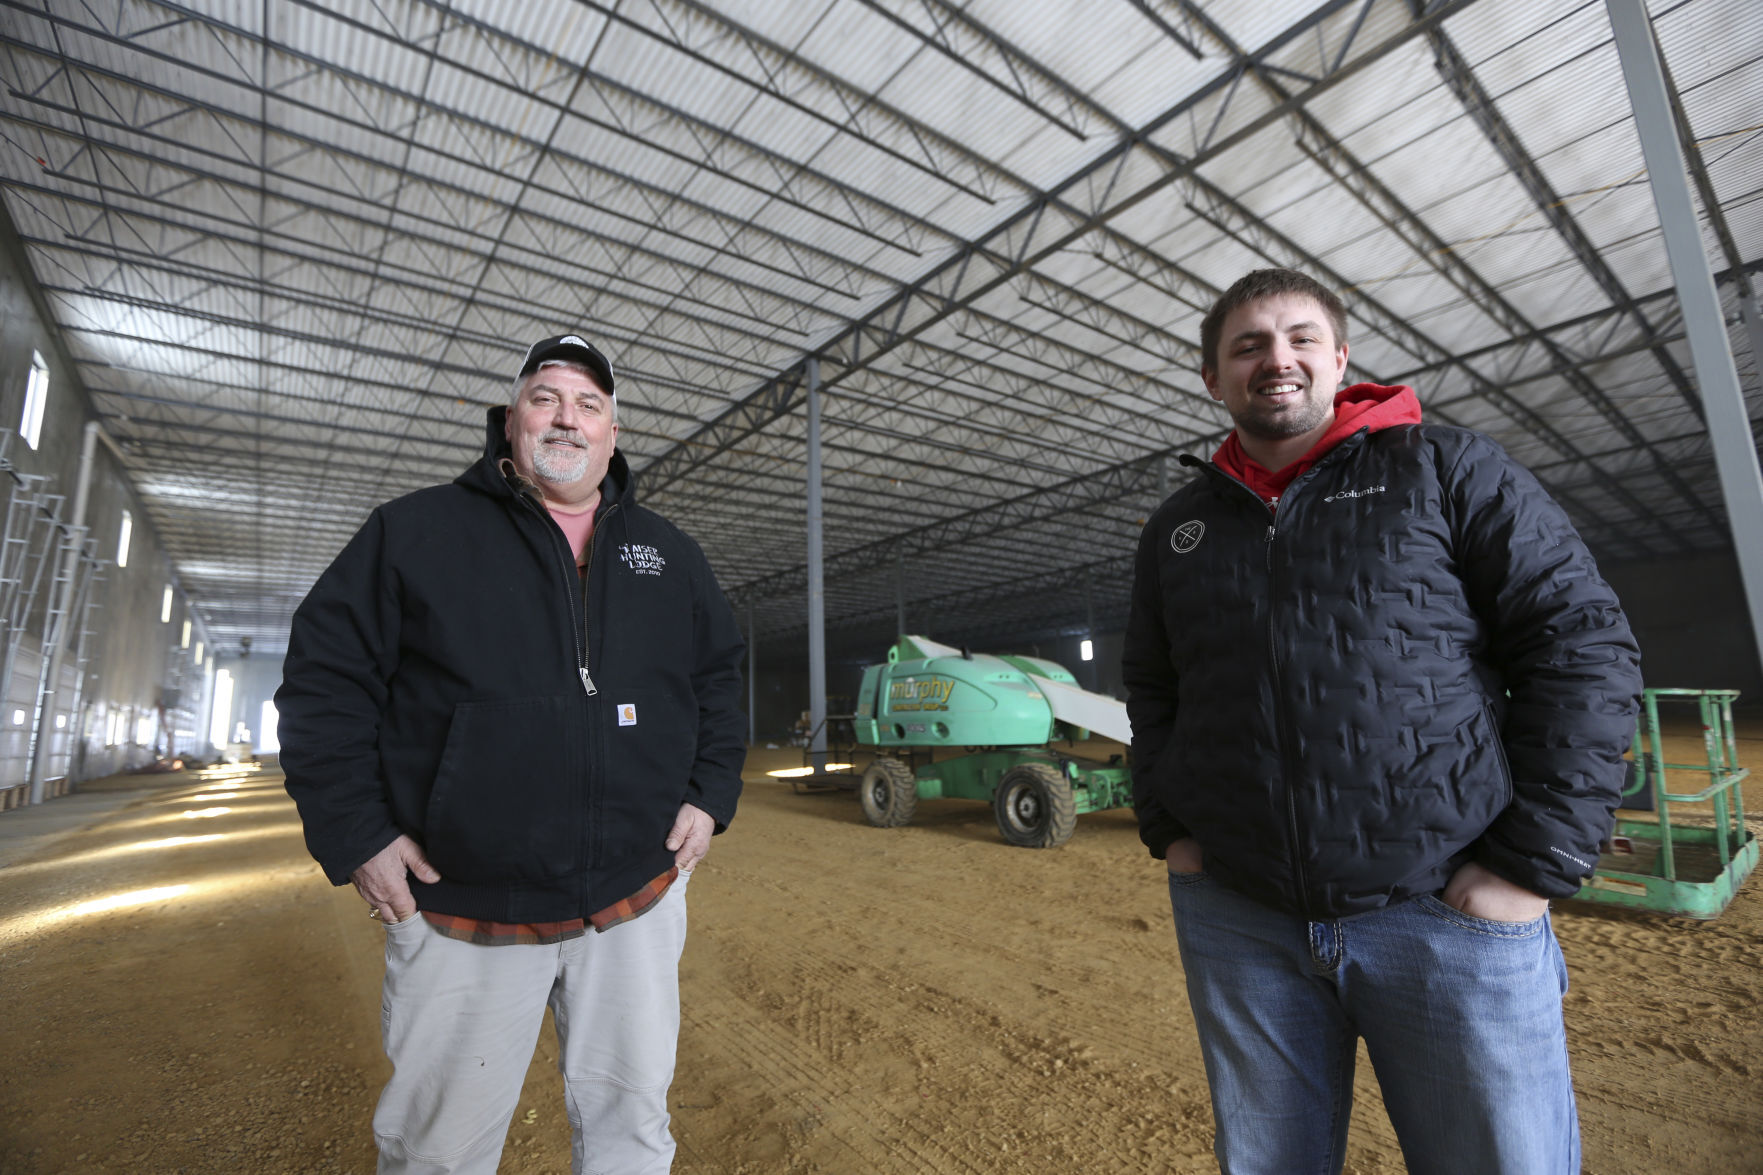 Jeff Kaiser (left) and his son, Corey Kaiser, along with two business partners, have invested more than $5 million to construct a 100,000-square-foot warehouse facility located in Kieler, Wis.    PHOTO CREDIT: Dave Kettering